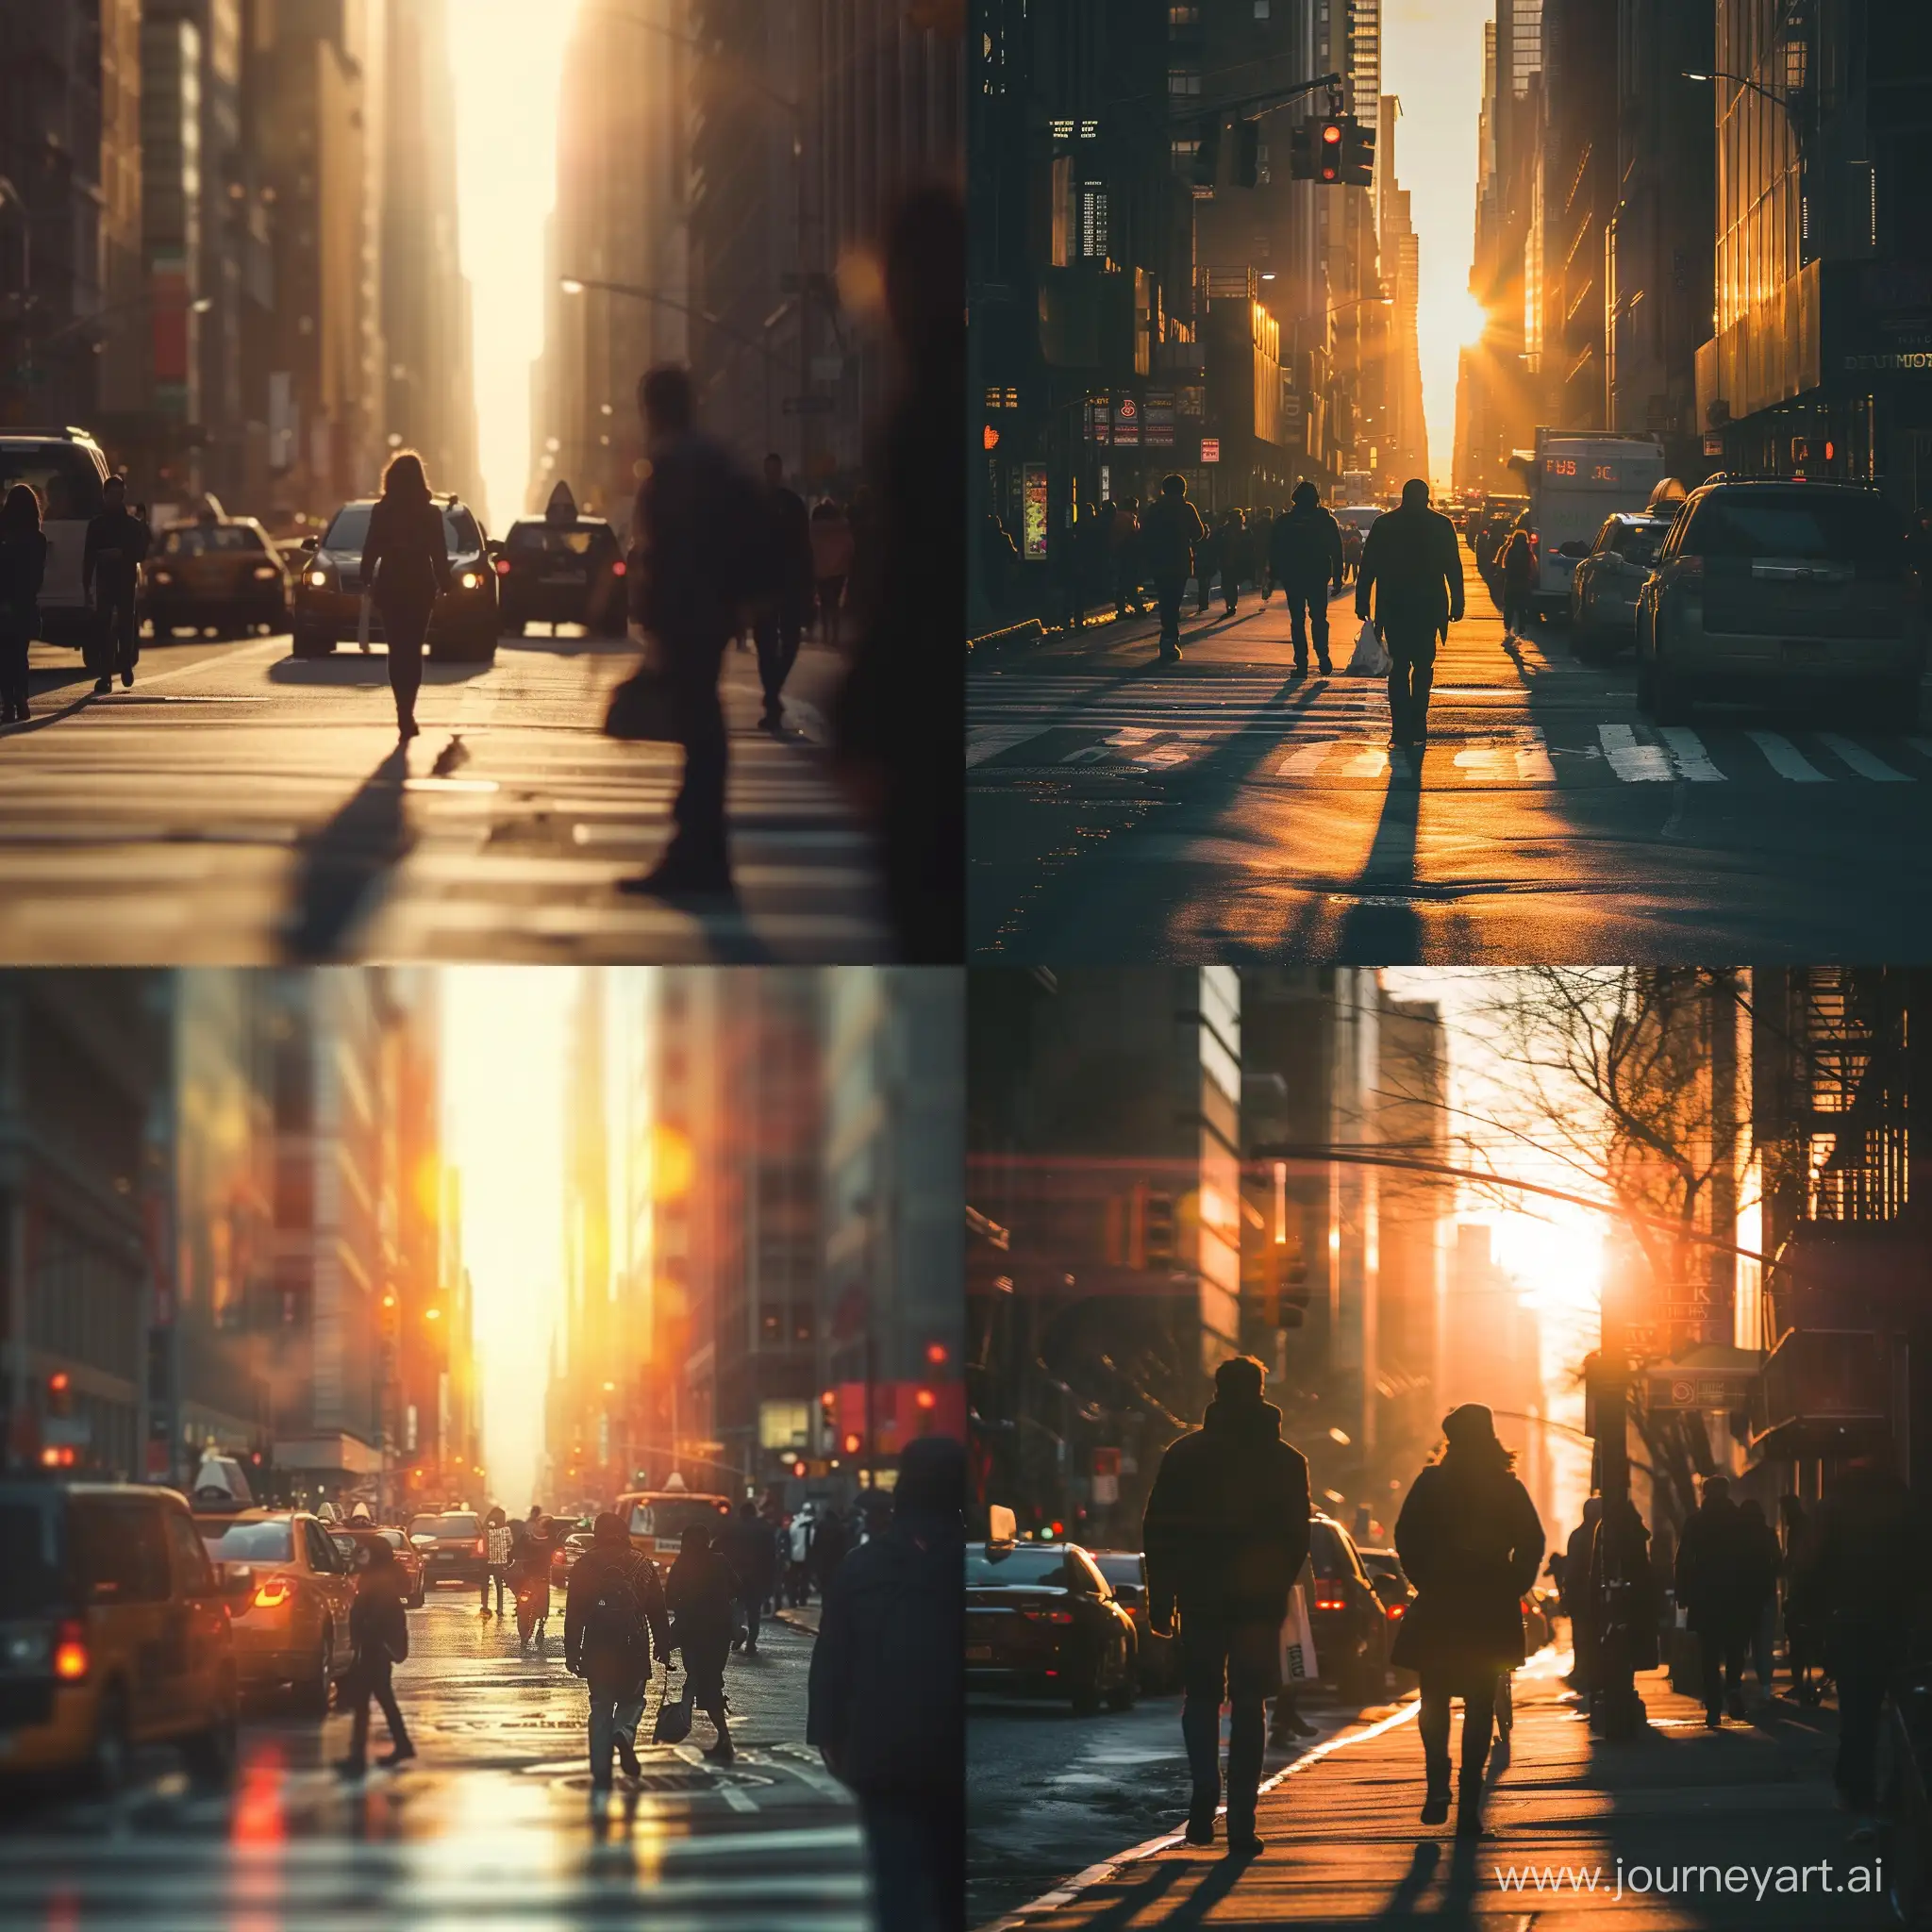 early morning in a city, people on the way to work, traffic, realistic photo, warm light, small details